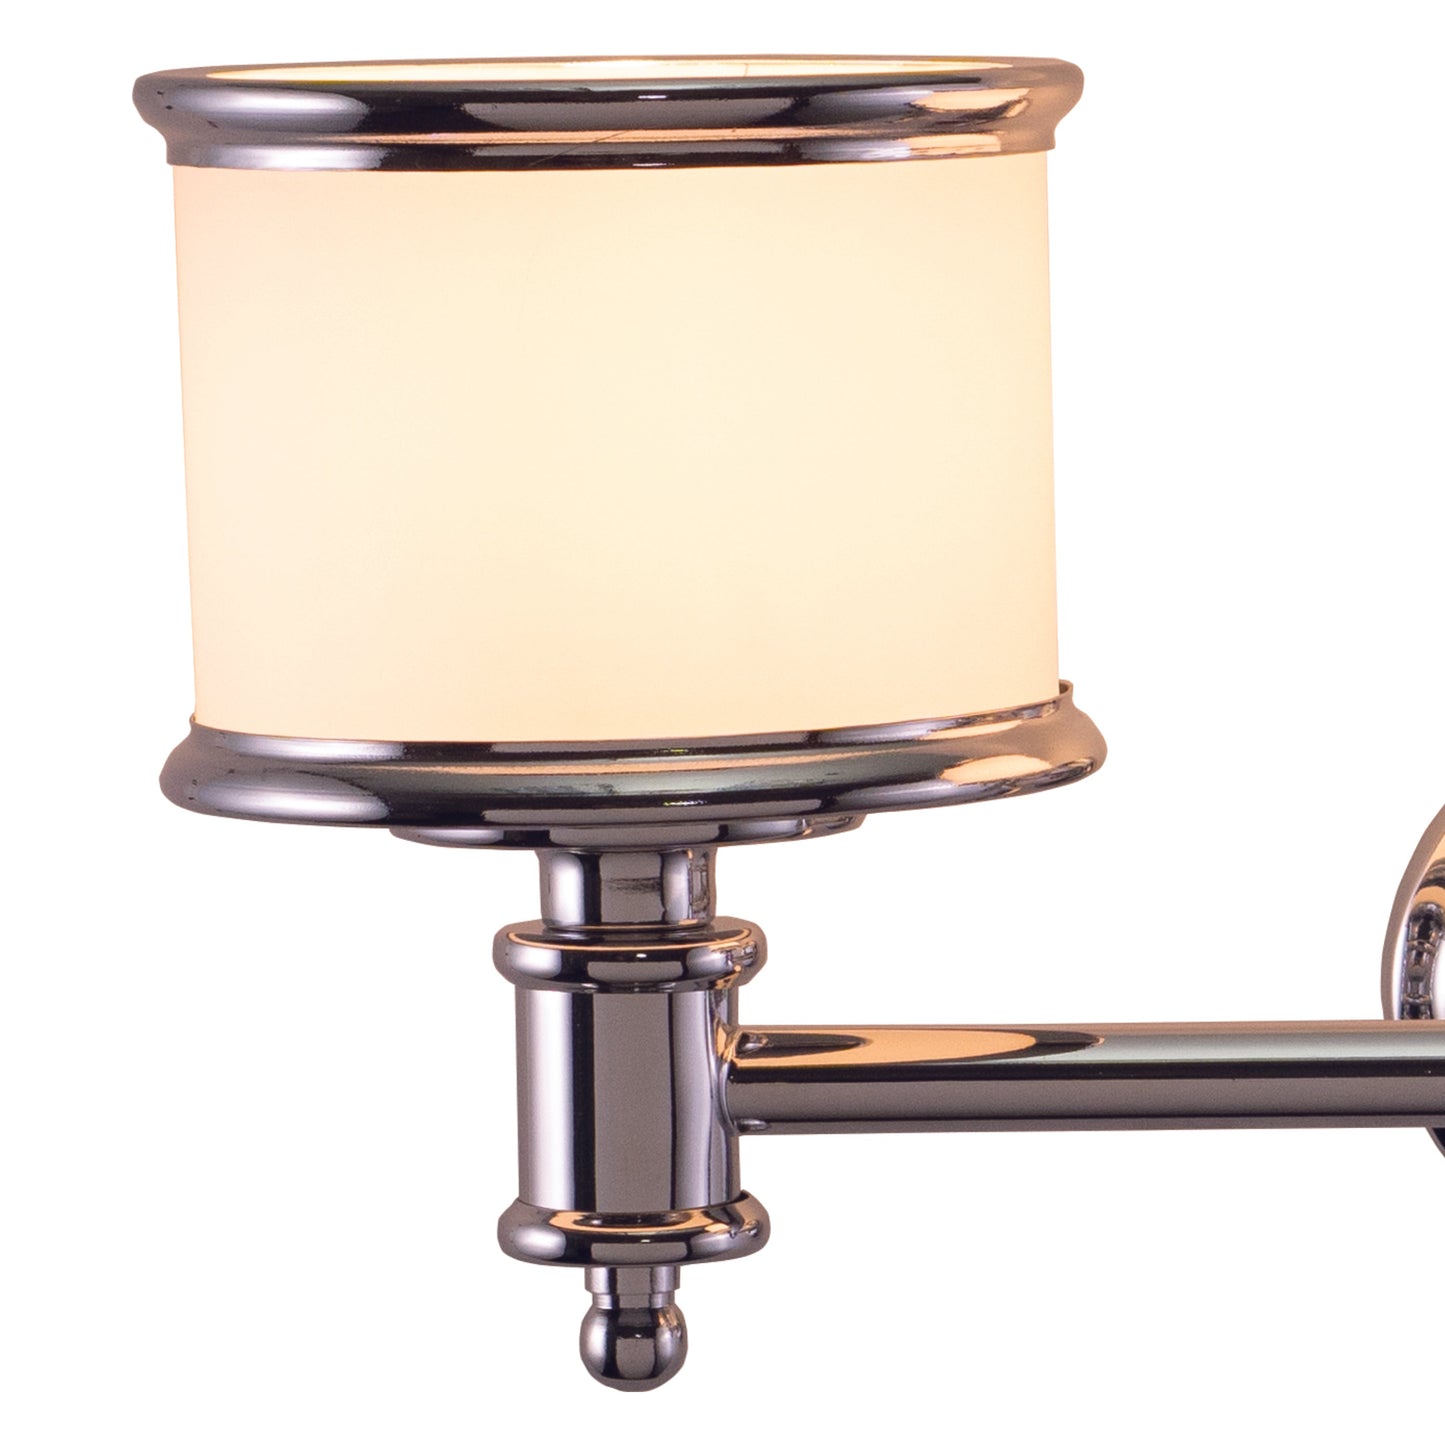 Vaxcel Carlisle 23" 3-Light Chrome Steel Bathroom Vanity Fixture With White Frosted Opal Glass Shades